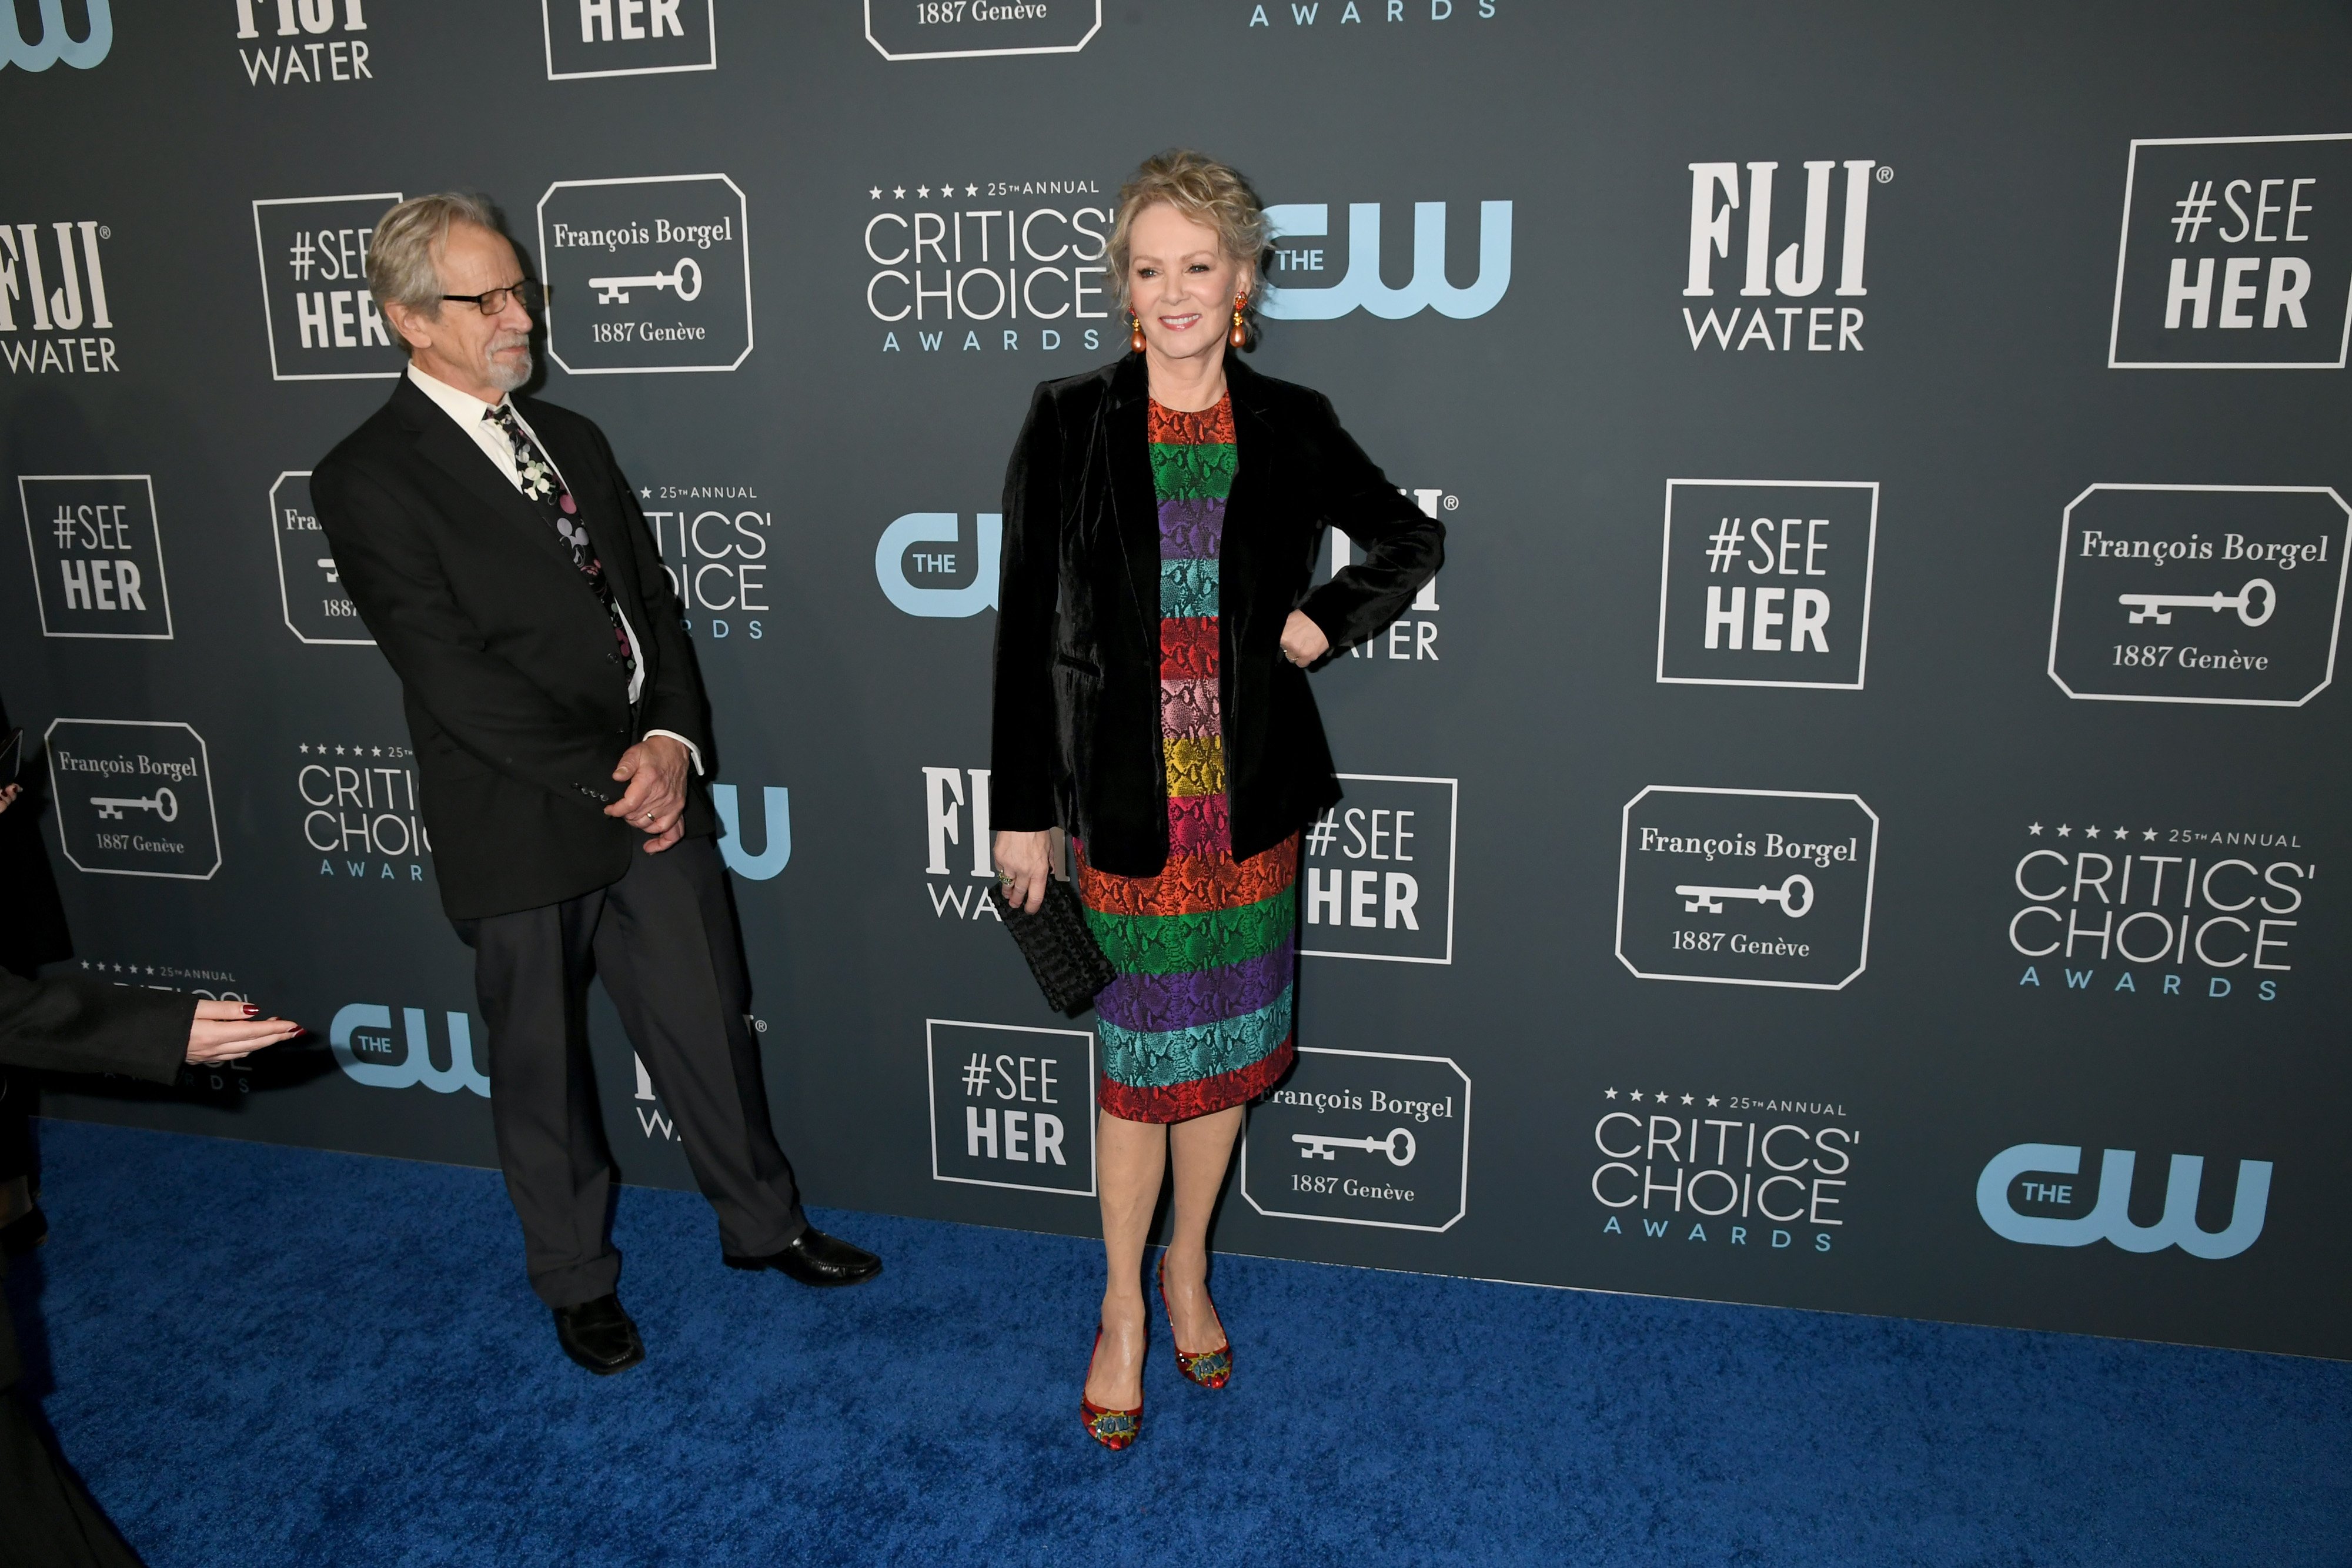 Richard Gilliland, Jean Smart's Husband, looks on at Jean Smart during the 25th Annual Critics Choice Awards in 2020